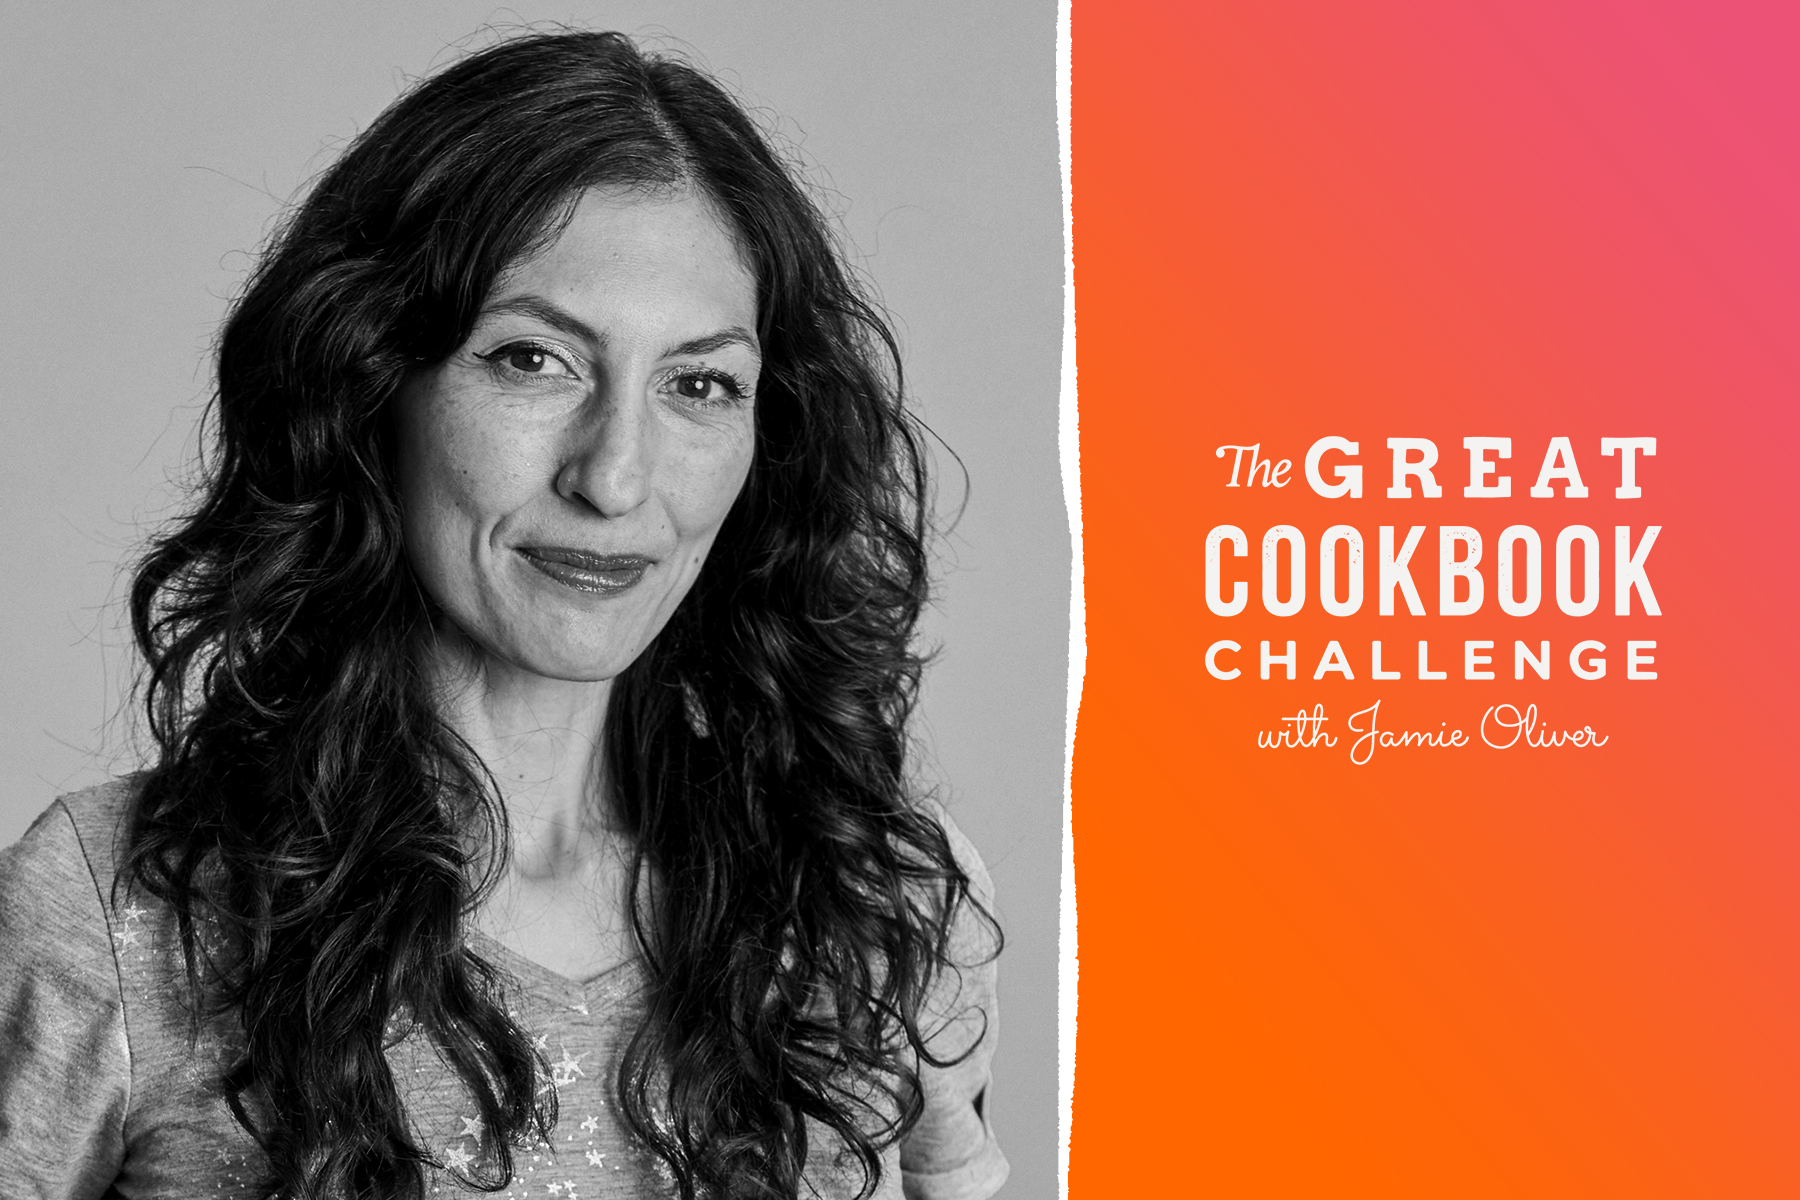 A photo of Dominique Woolf, winner of the Great Cookbook Challenge with Jamie Oliver.